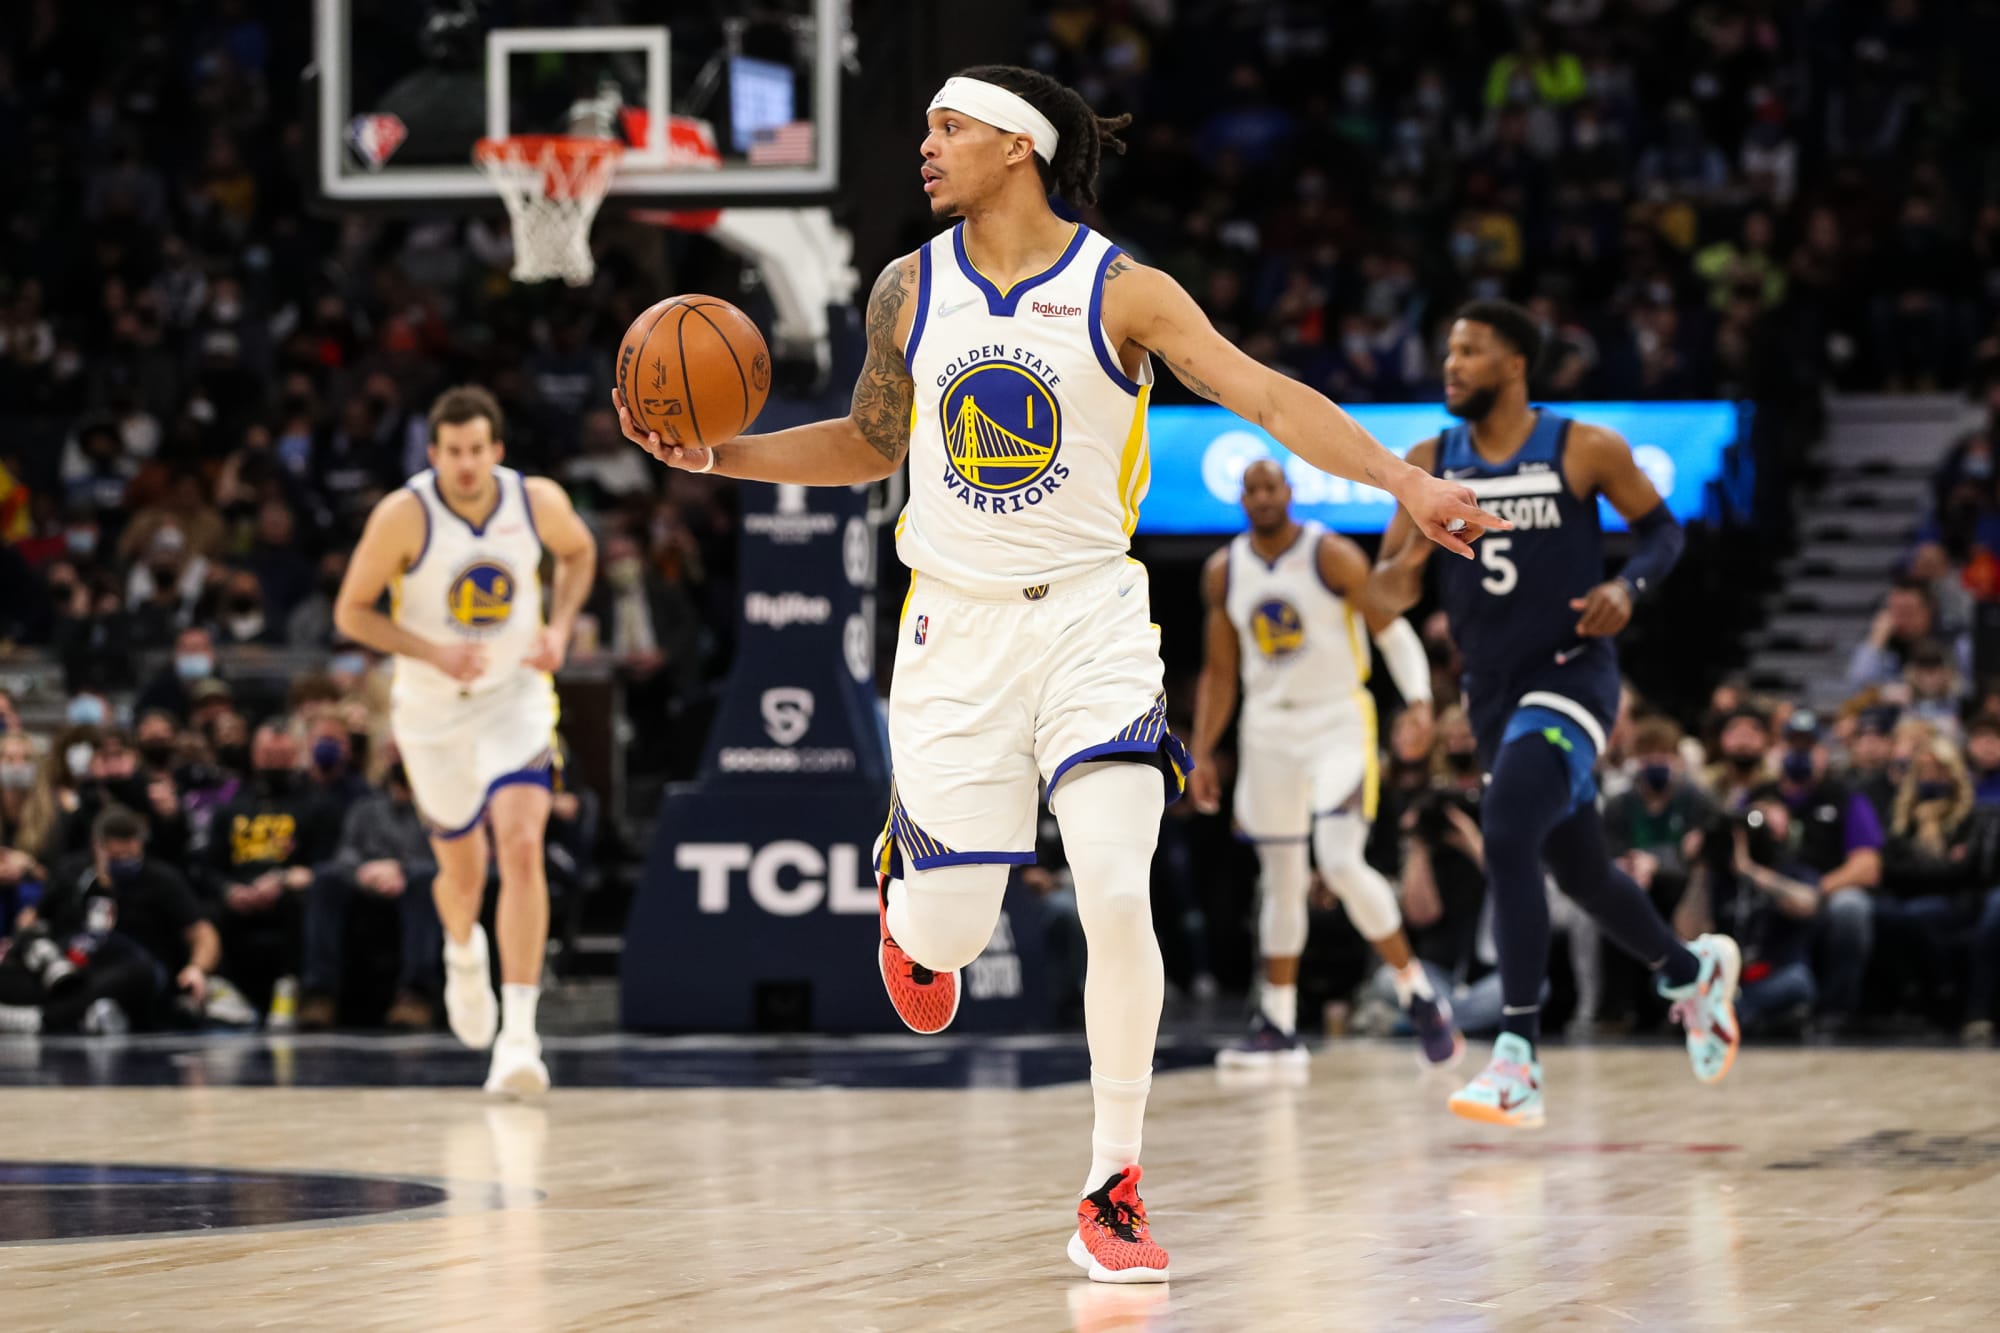 The sneakers worn by Damion Lee of the Golden State Warriors